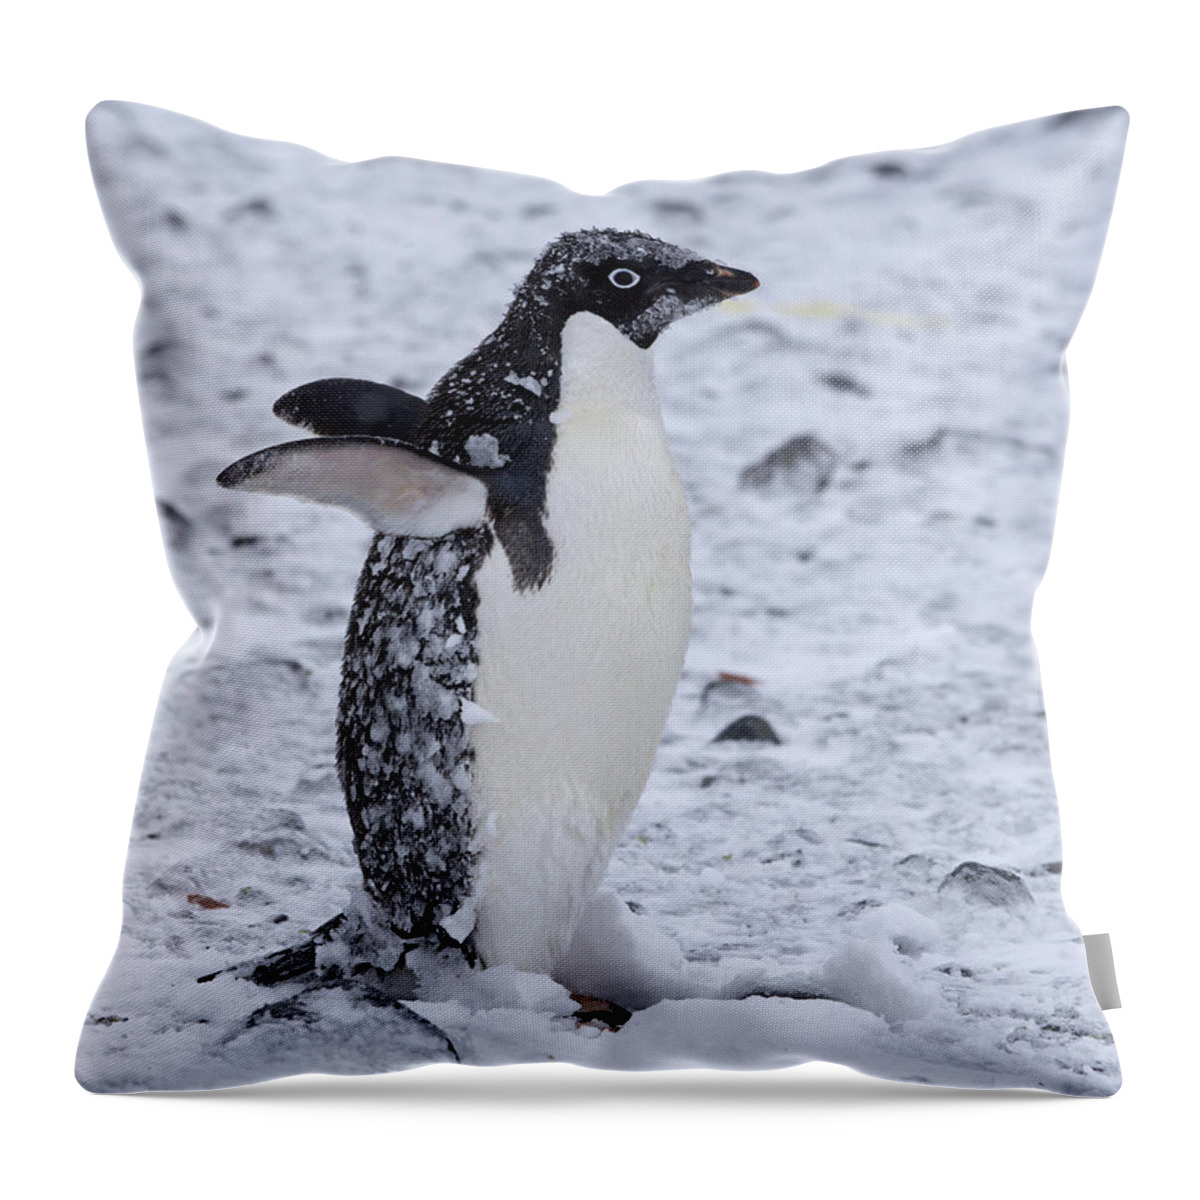 Adelie Penguin Throw Pillow featuring the photograph Southern Comfort by Tony Beck